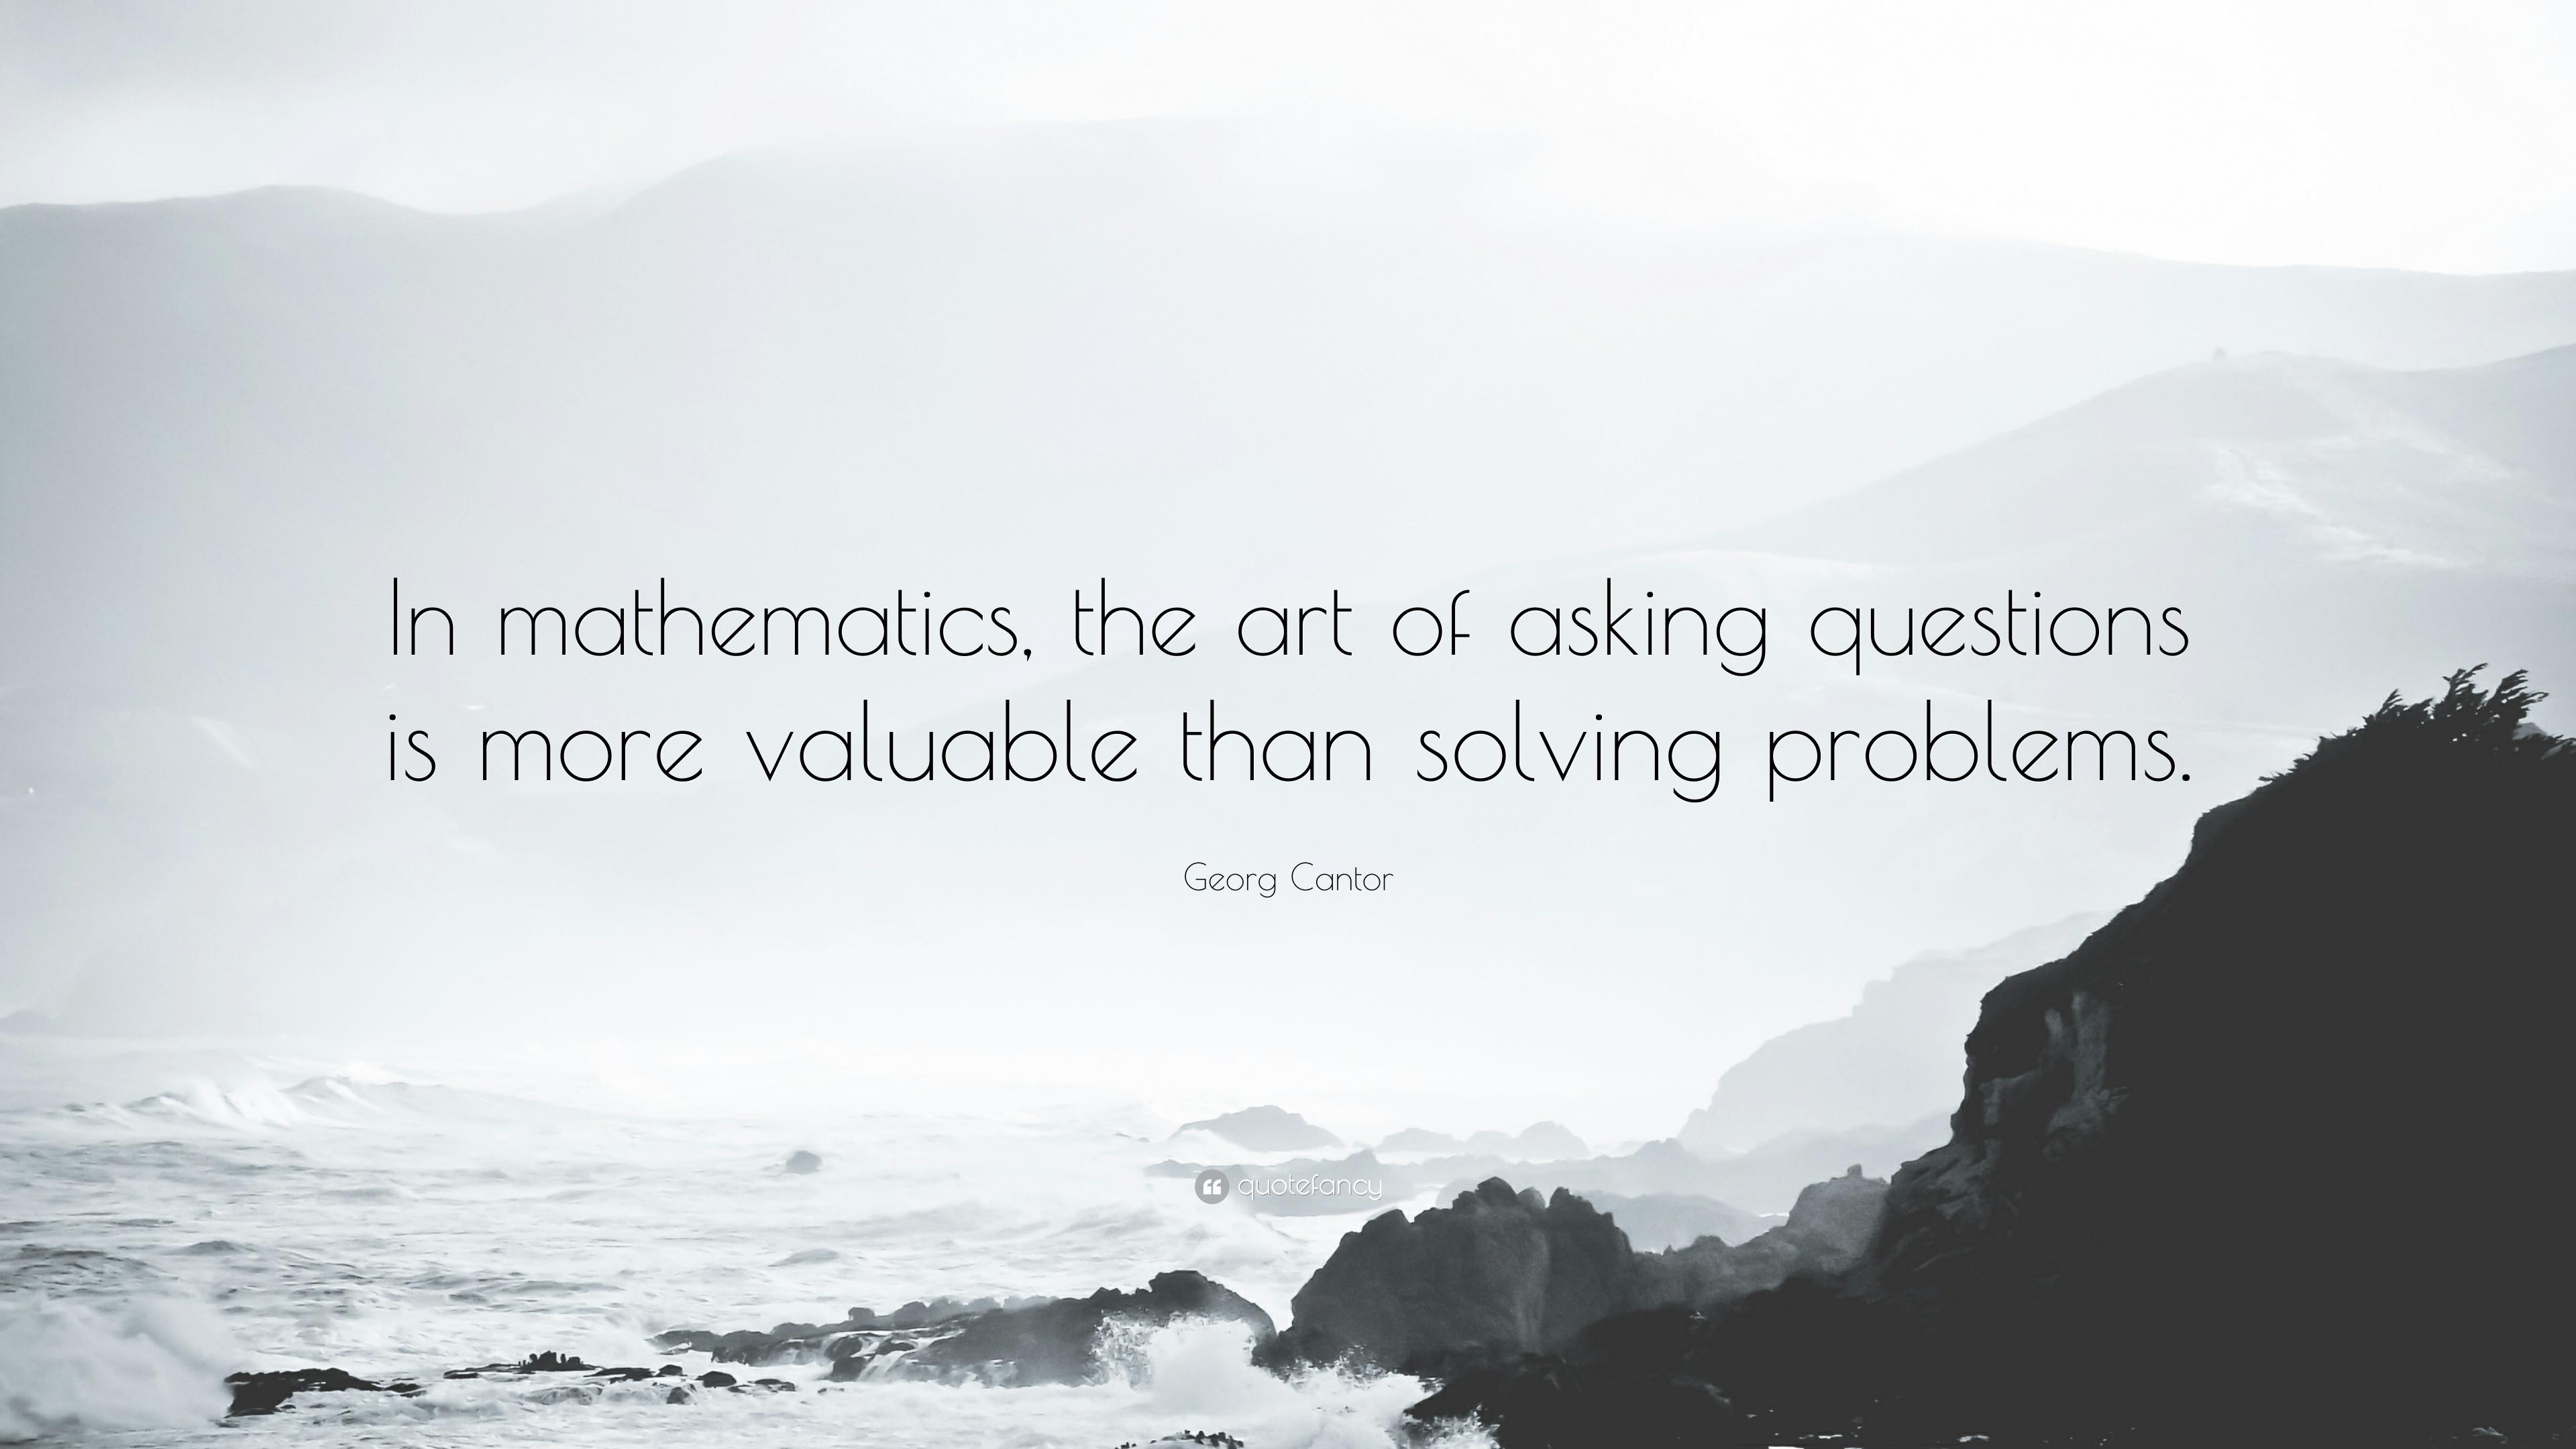 Georg Cantor Quote: “In mathematics, the art of asking questions